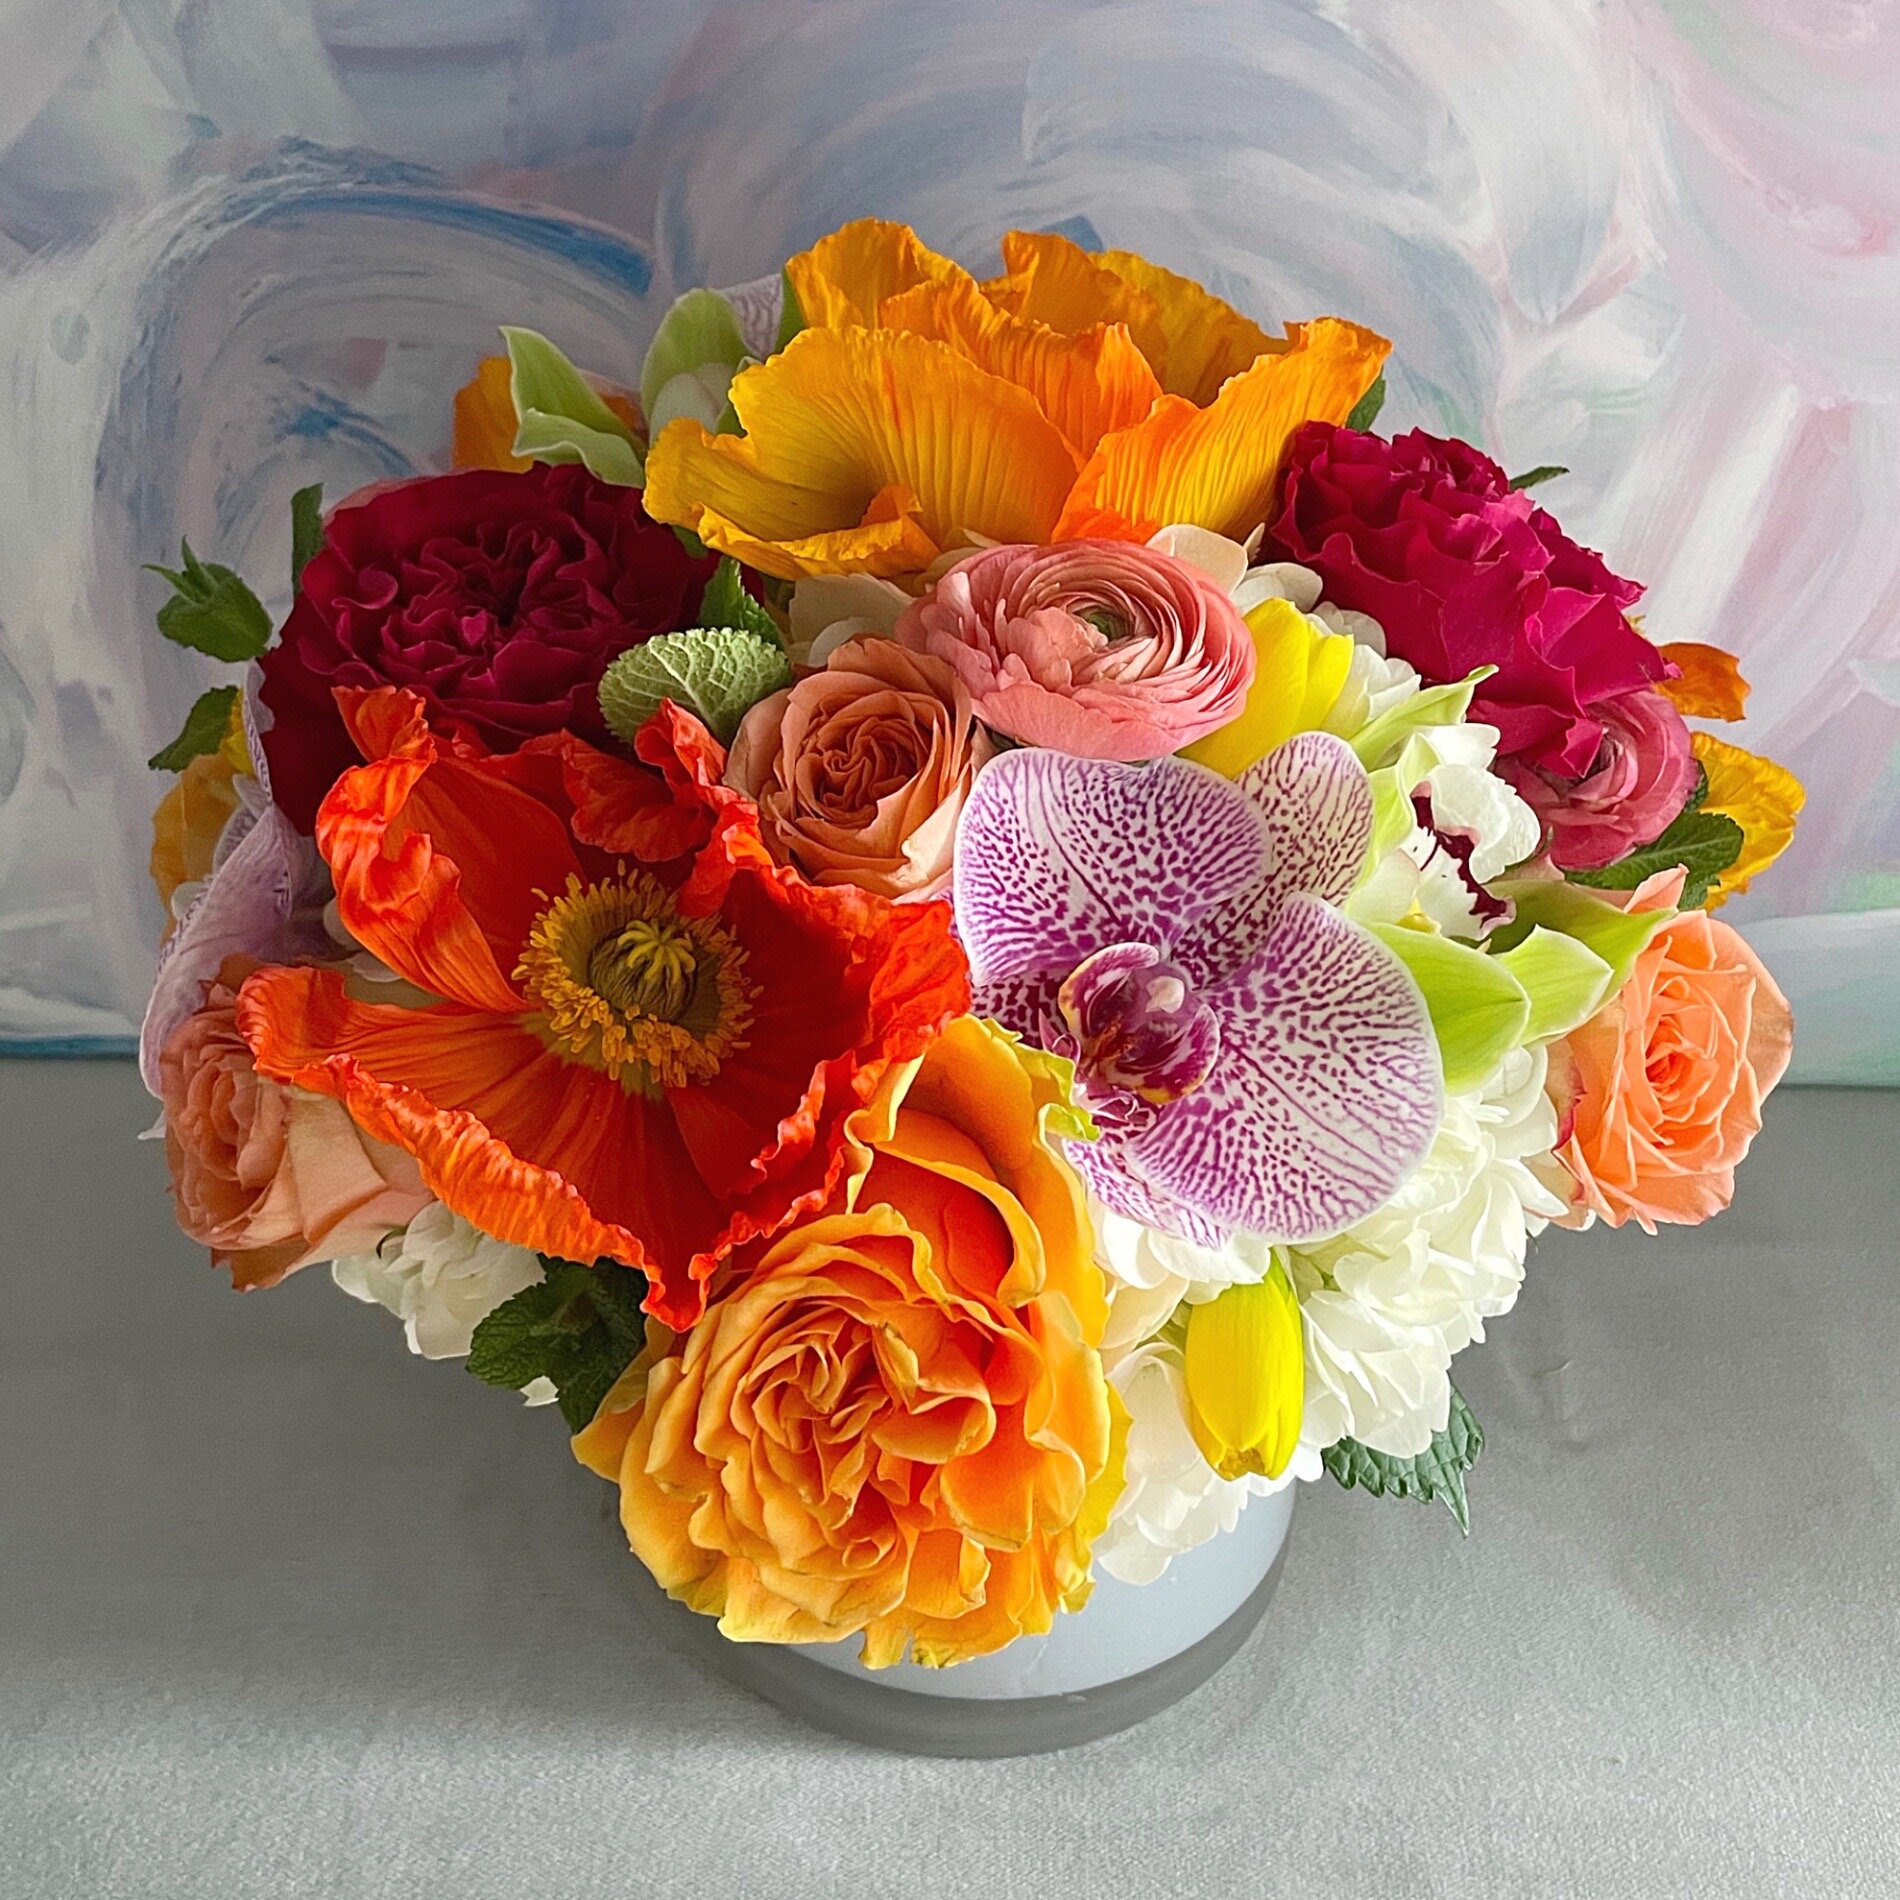  Hot colors, orange, pink, round, orchids, roses. 